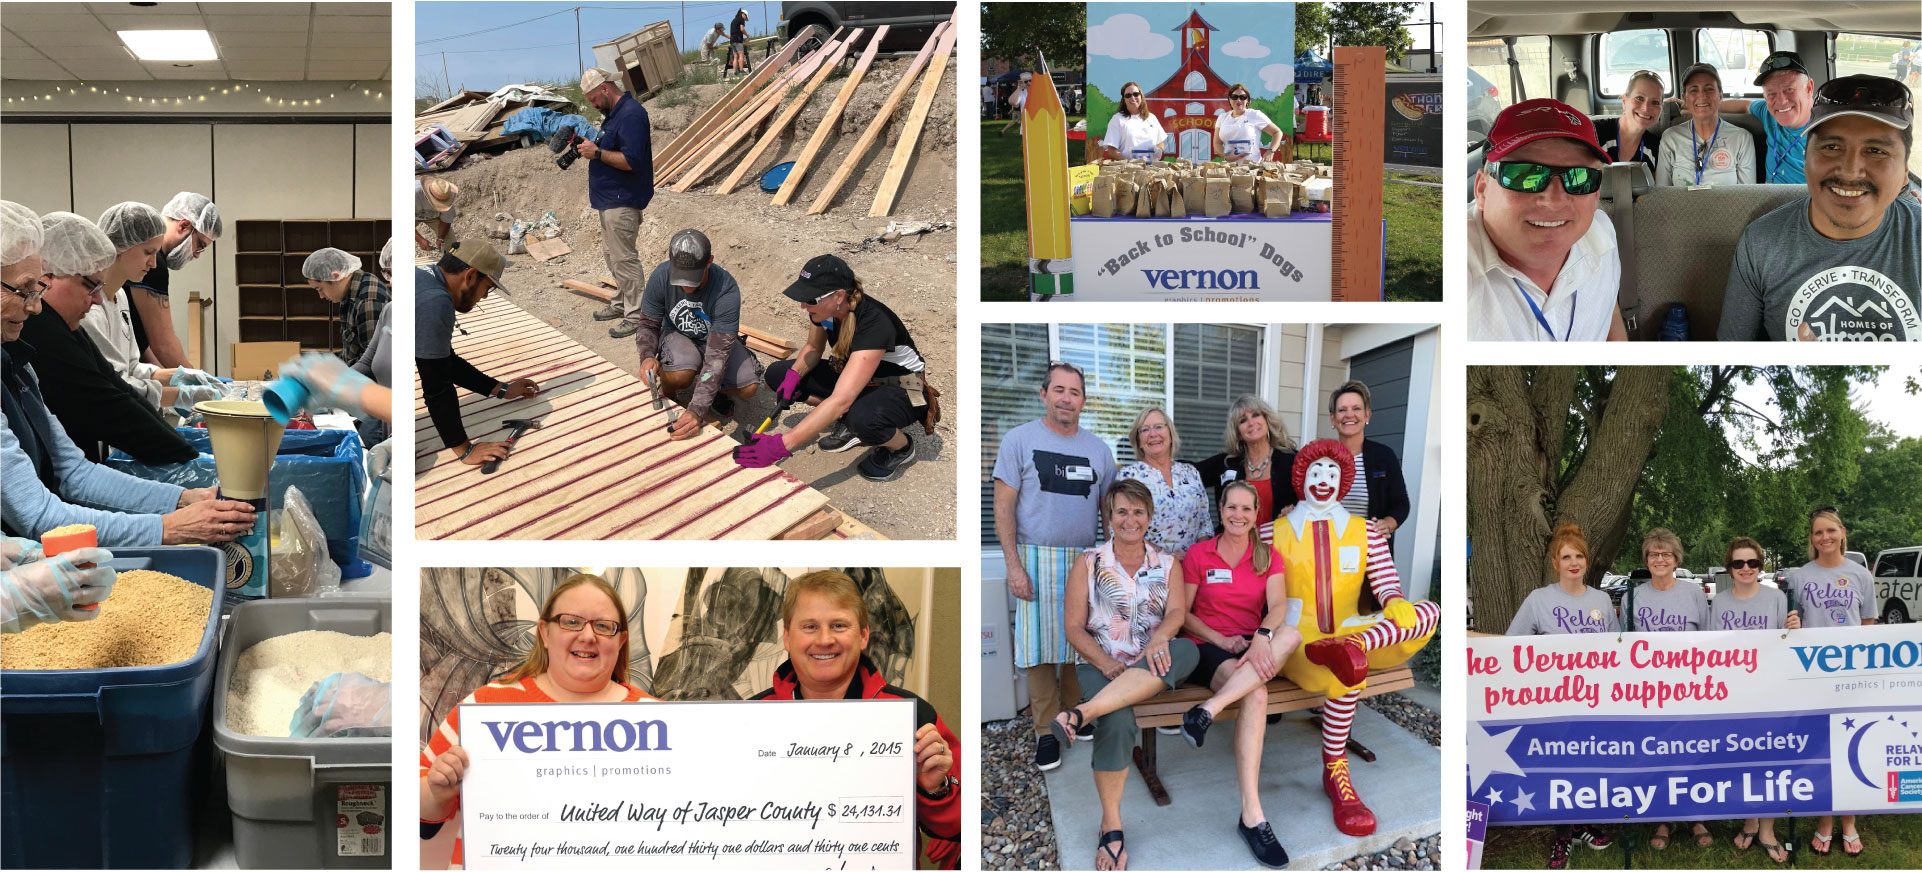 Vernon team cares and contributes support for those in need